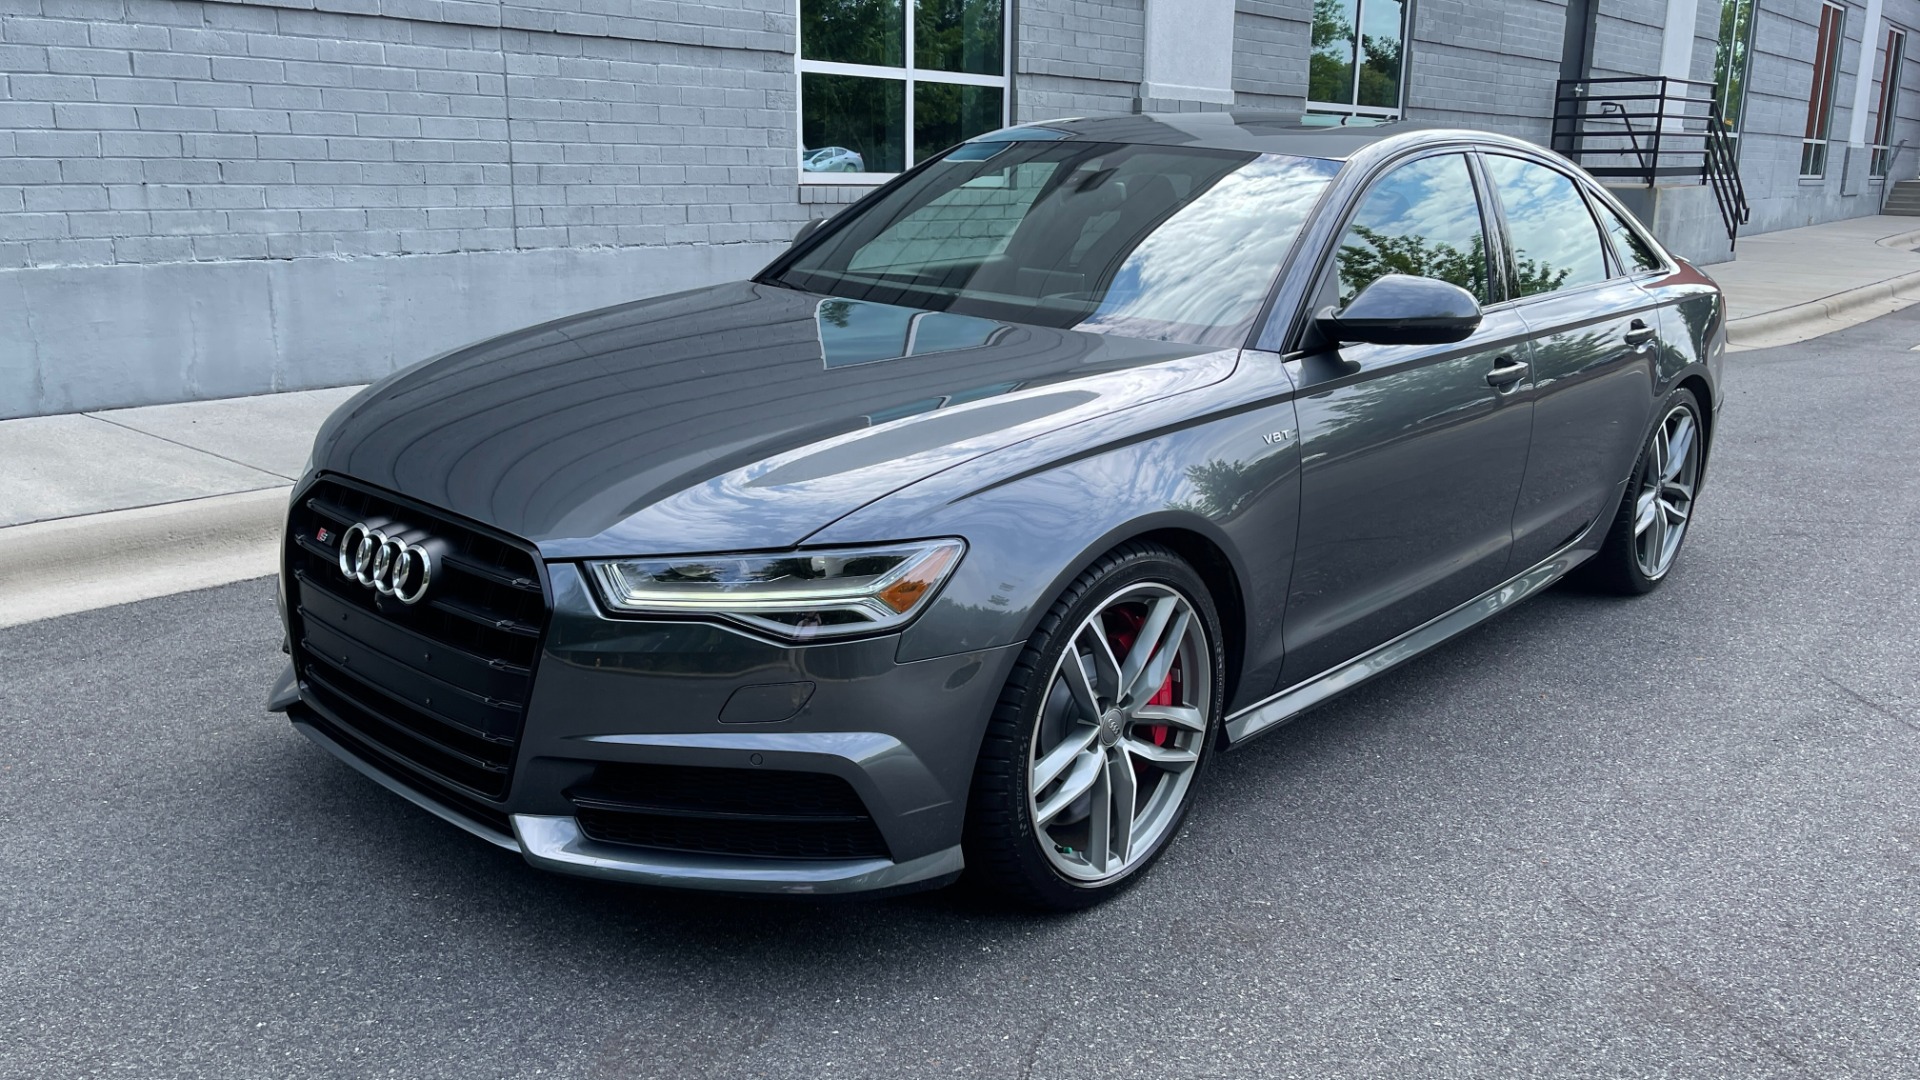 Used 2018 Audi S6 PRESTIGE / S SPORT / BLACK OPTIC / 4.0L V8 TURBO / COLD WEATHER PACKAGE for sale Sold at Formula Imports in Charlotte NC 28227 46